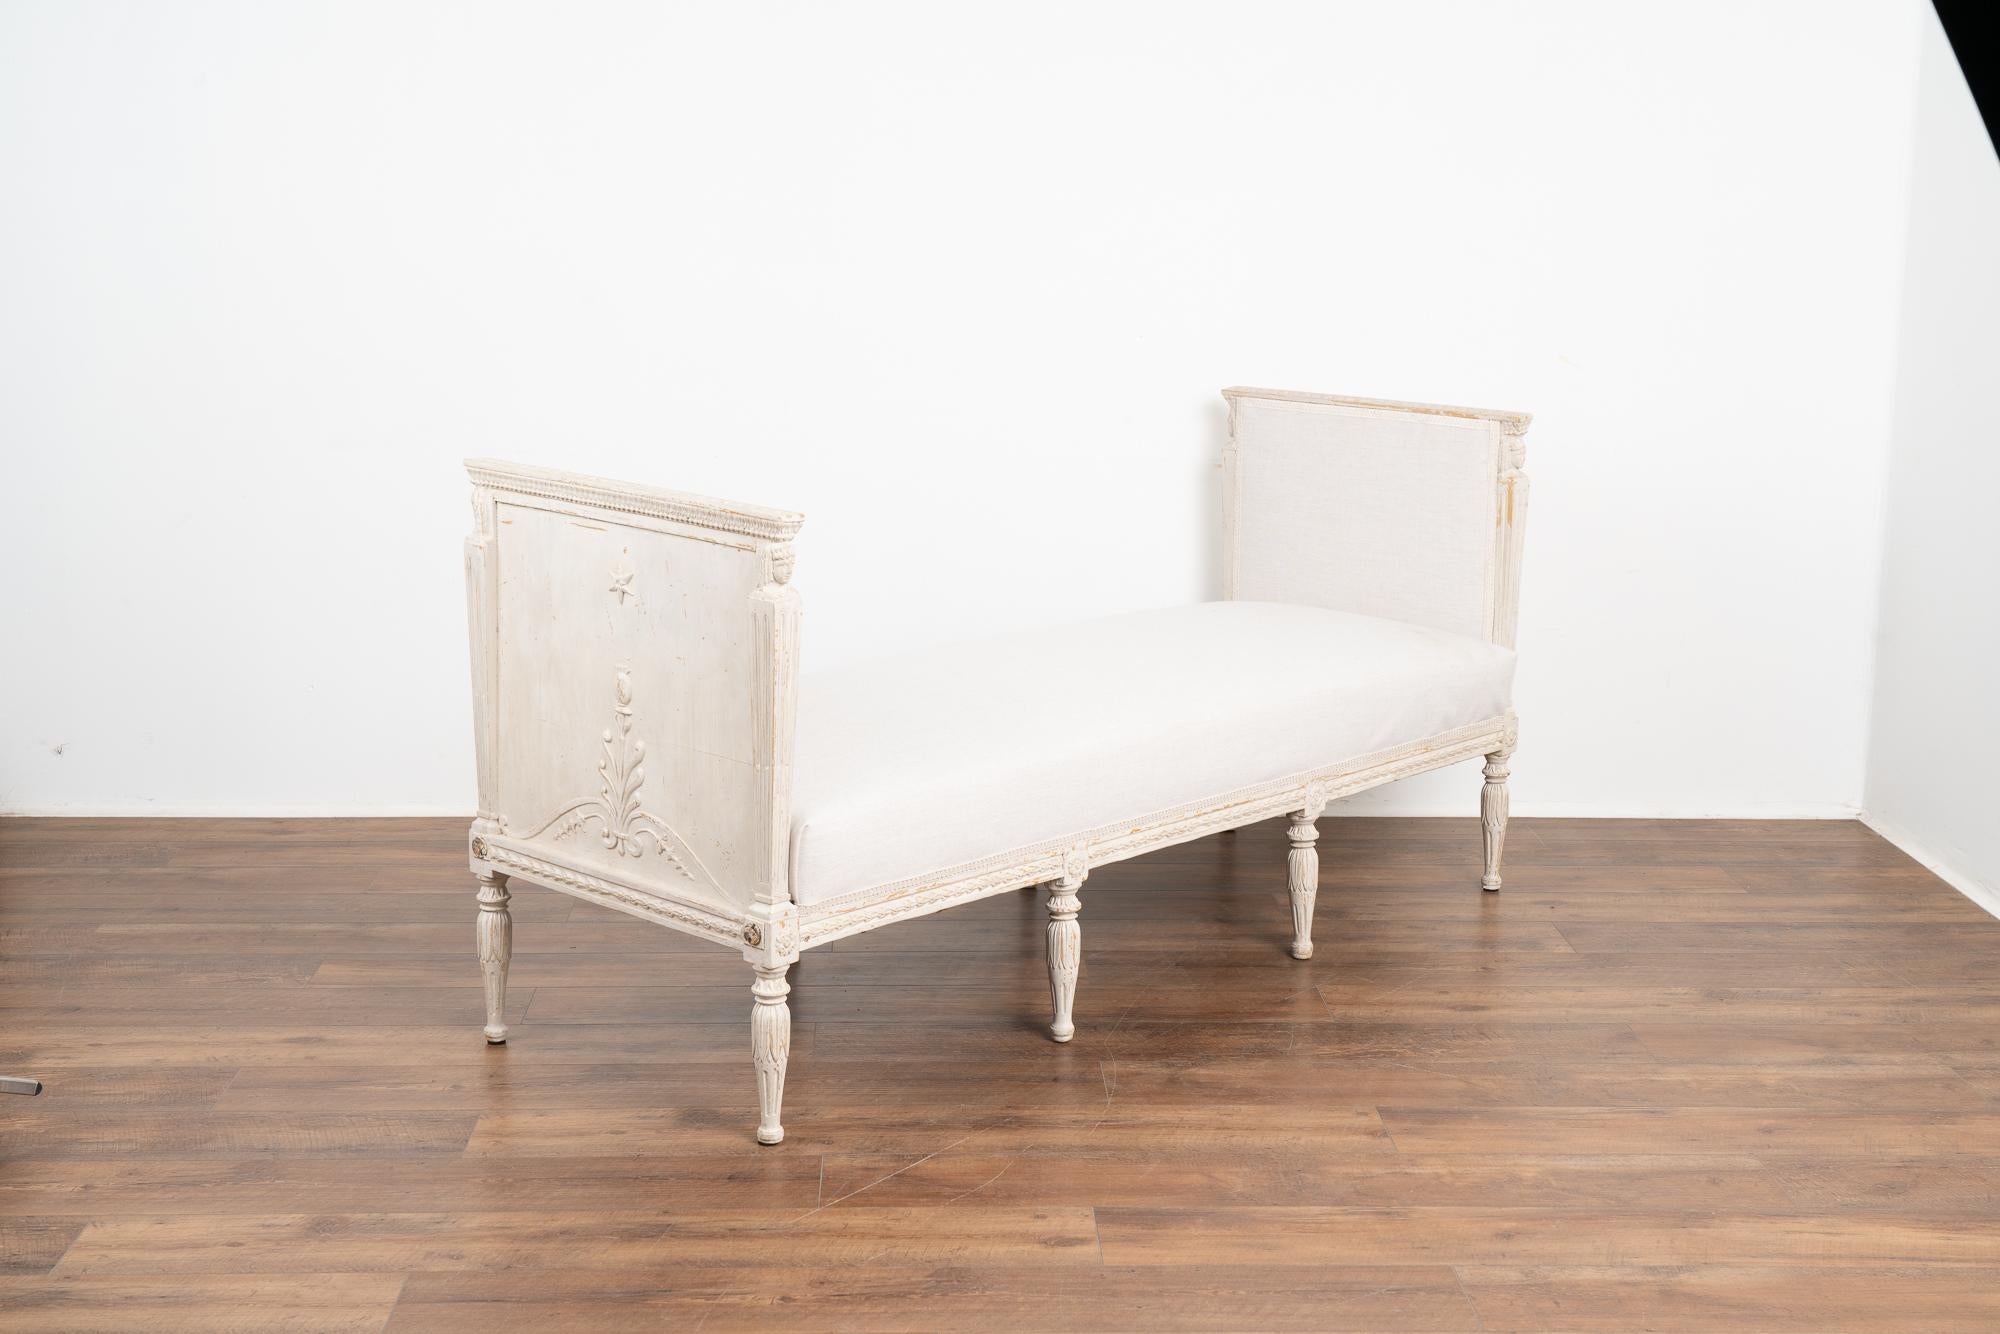 This exceptional sofa or settee is from the Swedish Gustavian period with white paint and exquisitely carved details including the side panels.
Please enlarge and examine the close up photos to appreciate the softly distressed white of the newer